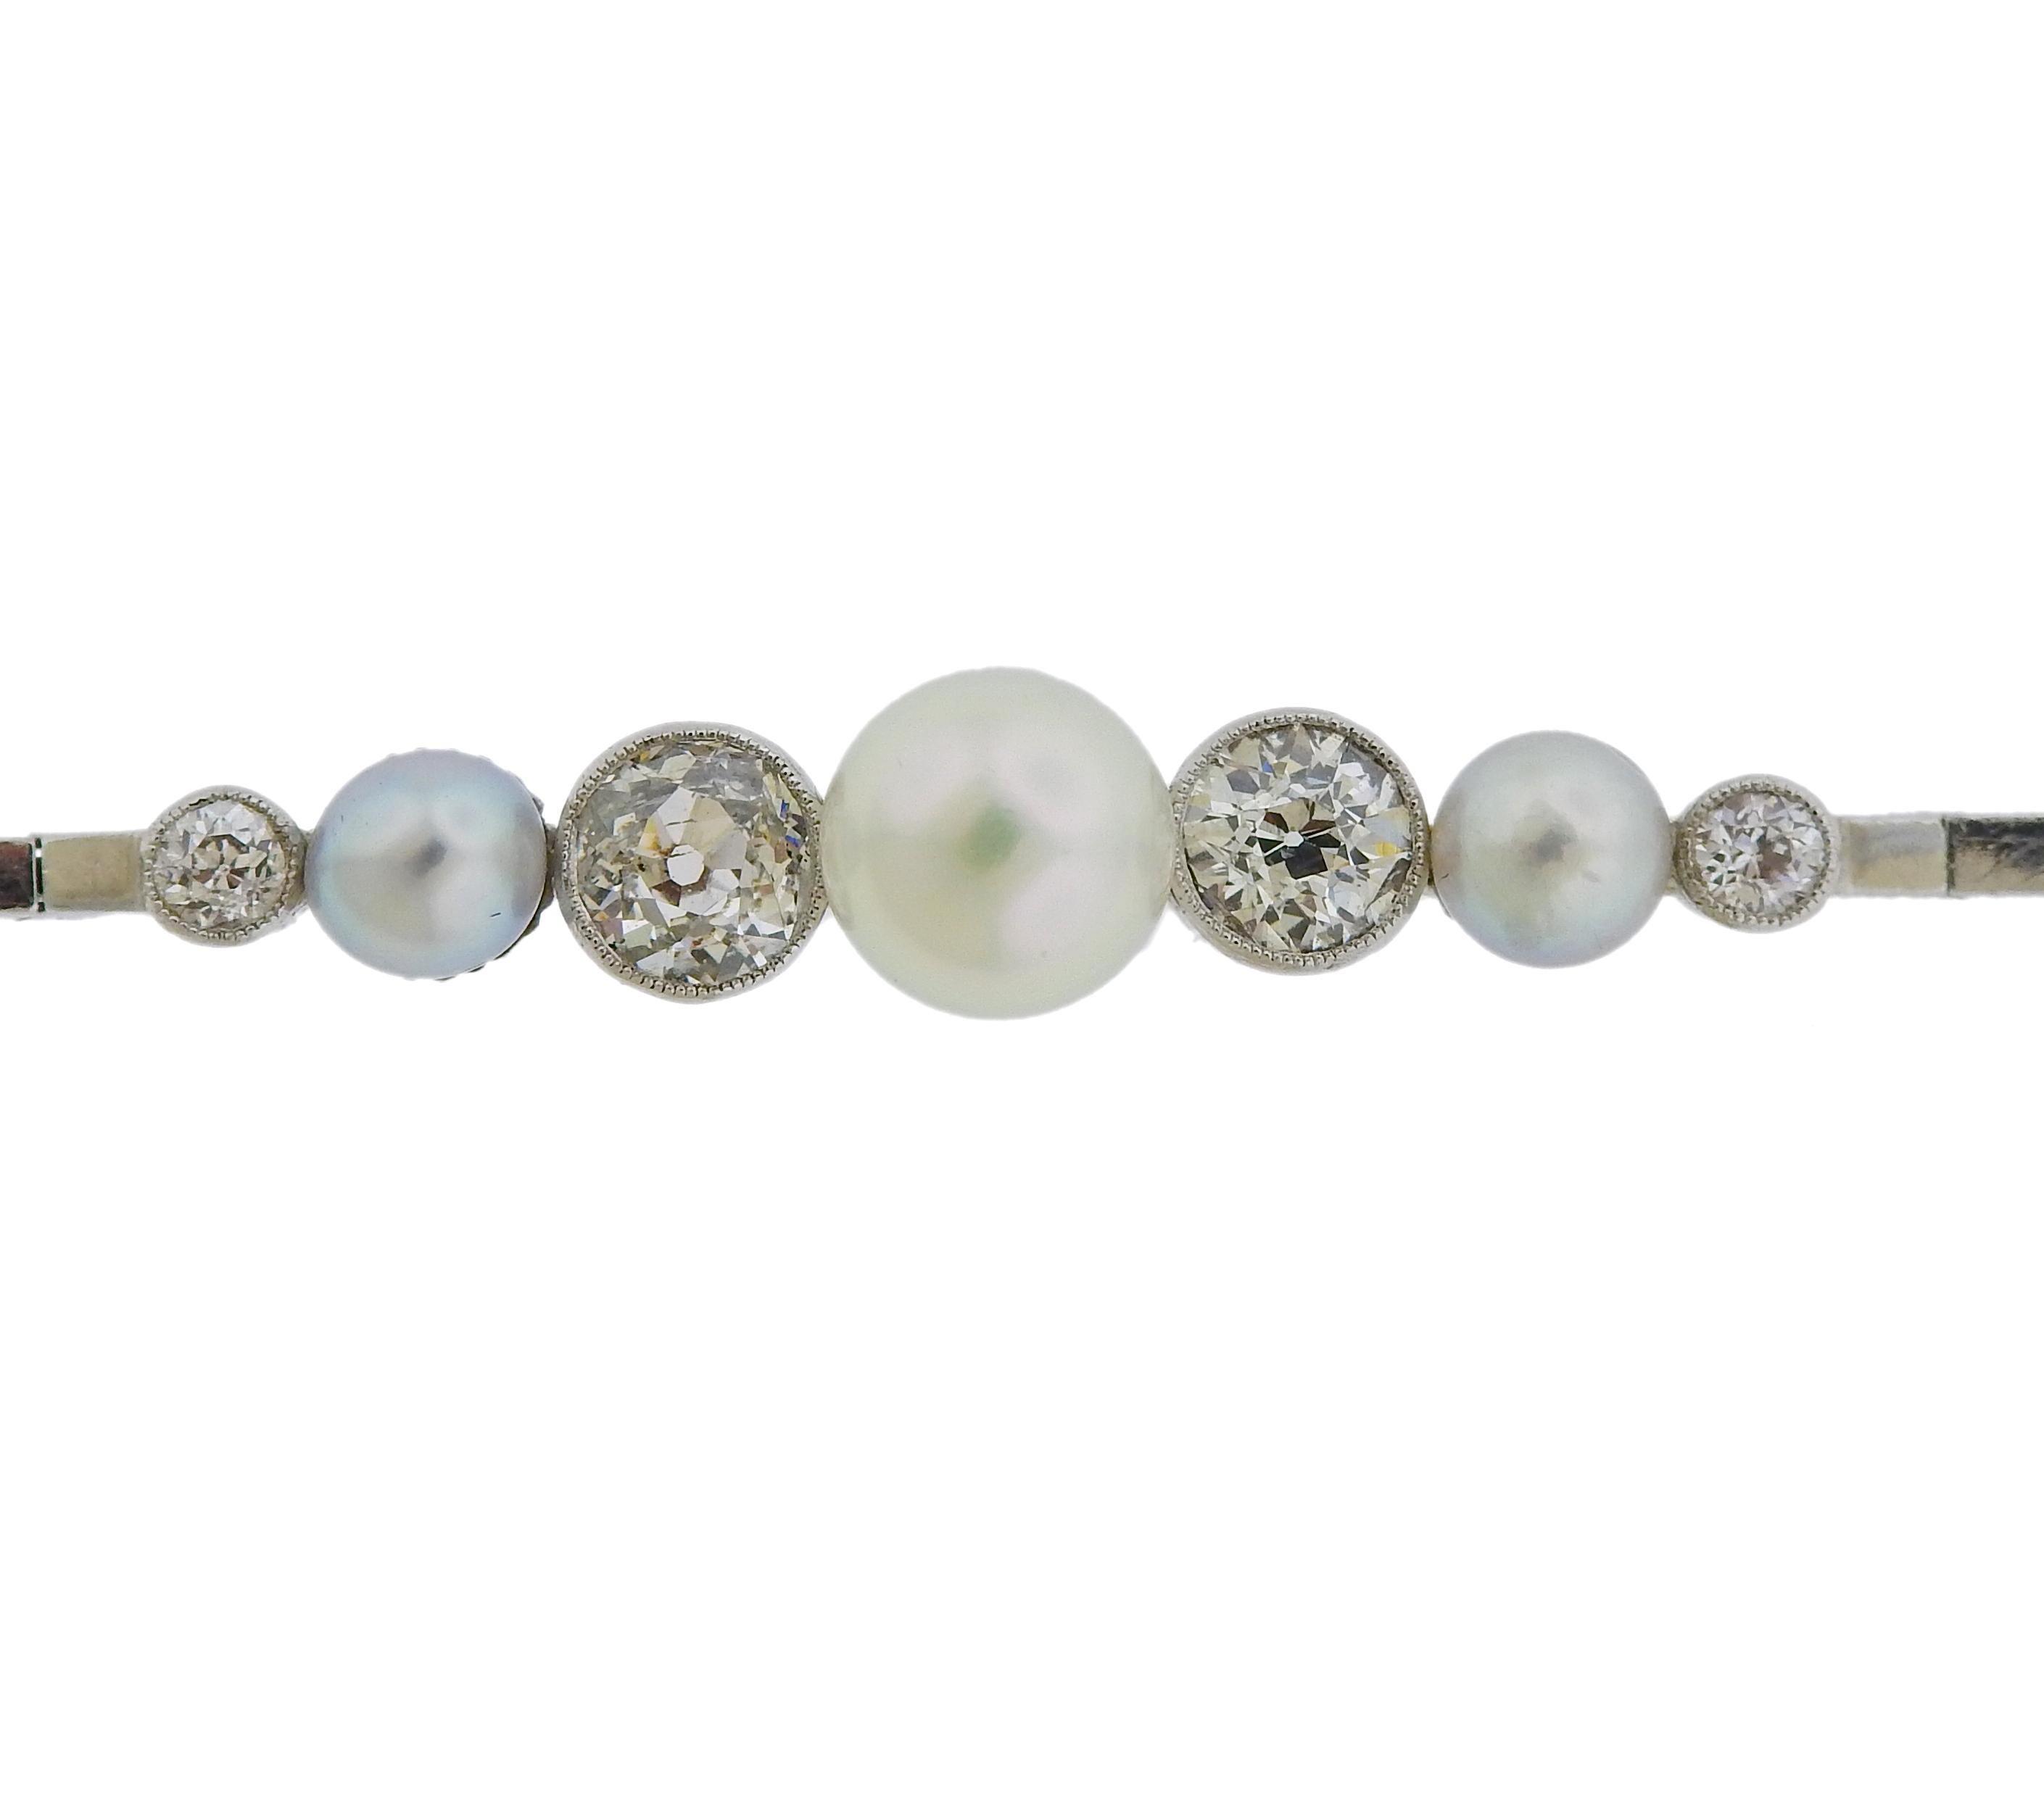 Vintage 14k gold bracelet with 5mm and 7.5mm pearls, surrounded with approx. 1.20ctw in diamonds. Bracelet is 7